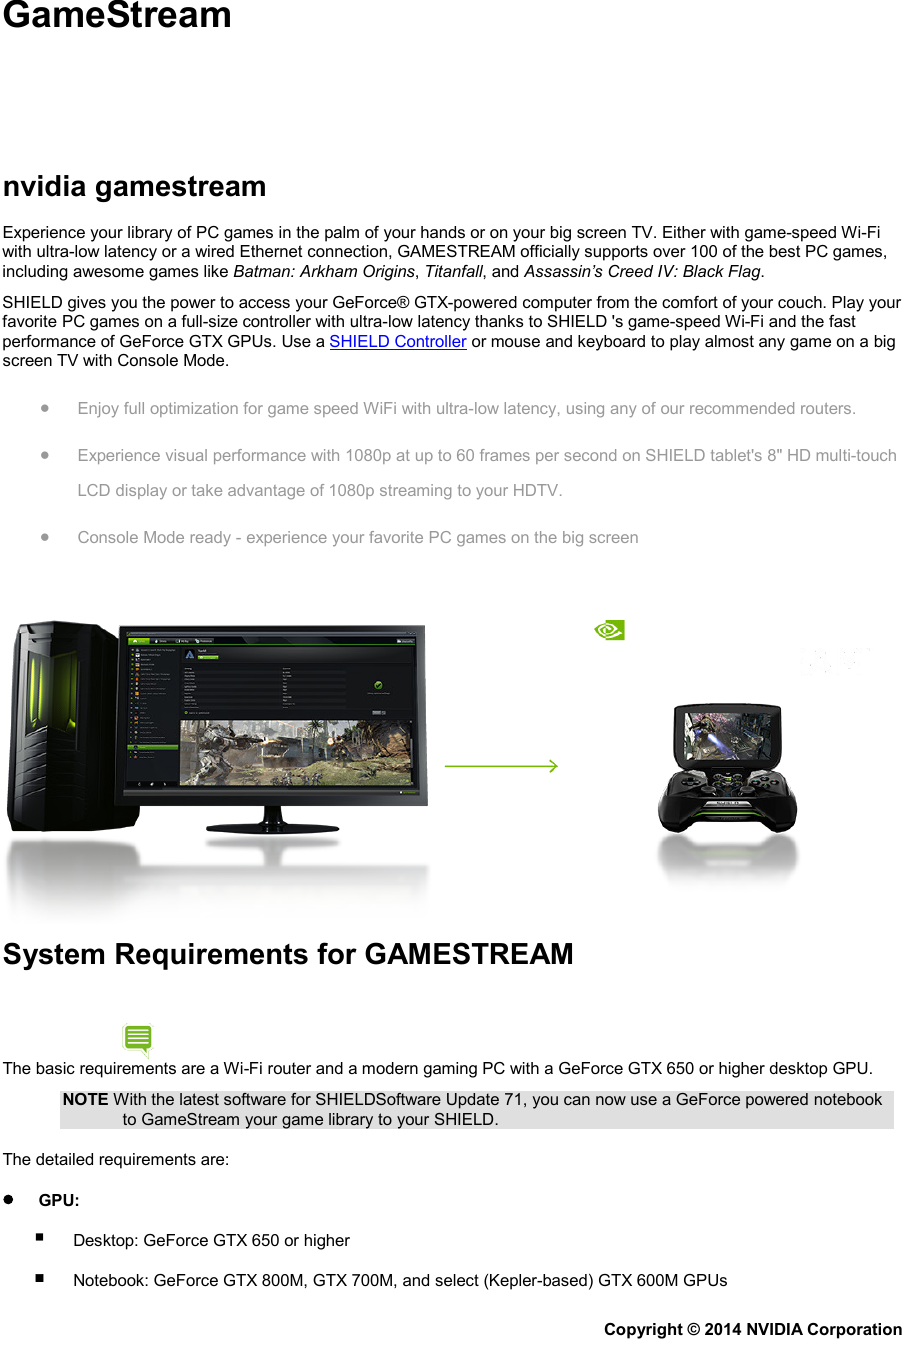 GameStream     nvidia gamestream Experience your library of PC games in the palm of your hands or on your big screen TV. Either with game-speed Wi-Fi with ultra-low latency or a wired Ethernet connection, GAMESTREAM officially supports over 100 of the best PC games, including awesome games like Batman: Arkham Origins, Titanfall, and Assassin’s Creed IV: Black Flag. SHIELD gives you the power to access your GeForce® GTX-powered computer from the comfort of your couch. Play your favorite PC games on a full-size controller with ultra-low latency thanks to SHIELD &apos;s game-speed Wi-Fi and the fast performance of GeForce GTX GPUs. Use a SHIELD Controller or mouse and keyboard to play almost any game on a big screen TV with Console Mode. • Enjoy full optimization for game speed WiFi with ultra-low latency, using any of our recommended routers. • Experience visual performance with 1080p at up to 60 frames per second on SHIELD tablet&apos;s 8&quot; HD multi-touch LCD display or take advantage of 1080p streaming to your HDTV. • Console Mode ready - experience your favorite PC games on the big screen  System Requirements for GAMESTREAM The basic requirements are a Wi-Fi router and a modern gaming PC with a GeForce GTX 650 or higher desktop GPU. NOTE With the latest software for SHIELDSoftware Update 71, you can now use a GeForce powered notebook to GameStream your game library to your SHIELD. The detailed requirements are: •       GPU:         Desktop: GeForce GTX 650 or higher         Notebook: GeForce GTX 800M, GTX 700M, and select (Kepler-based) GTX 600M GPUs Copyright © 2014 NVIDIA Corporation   